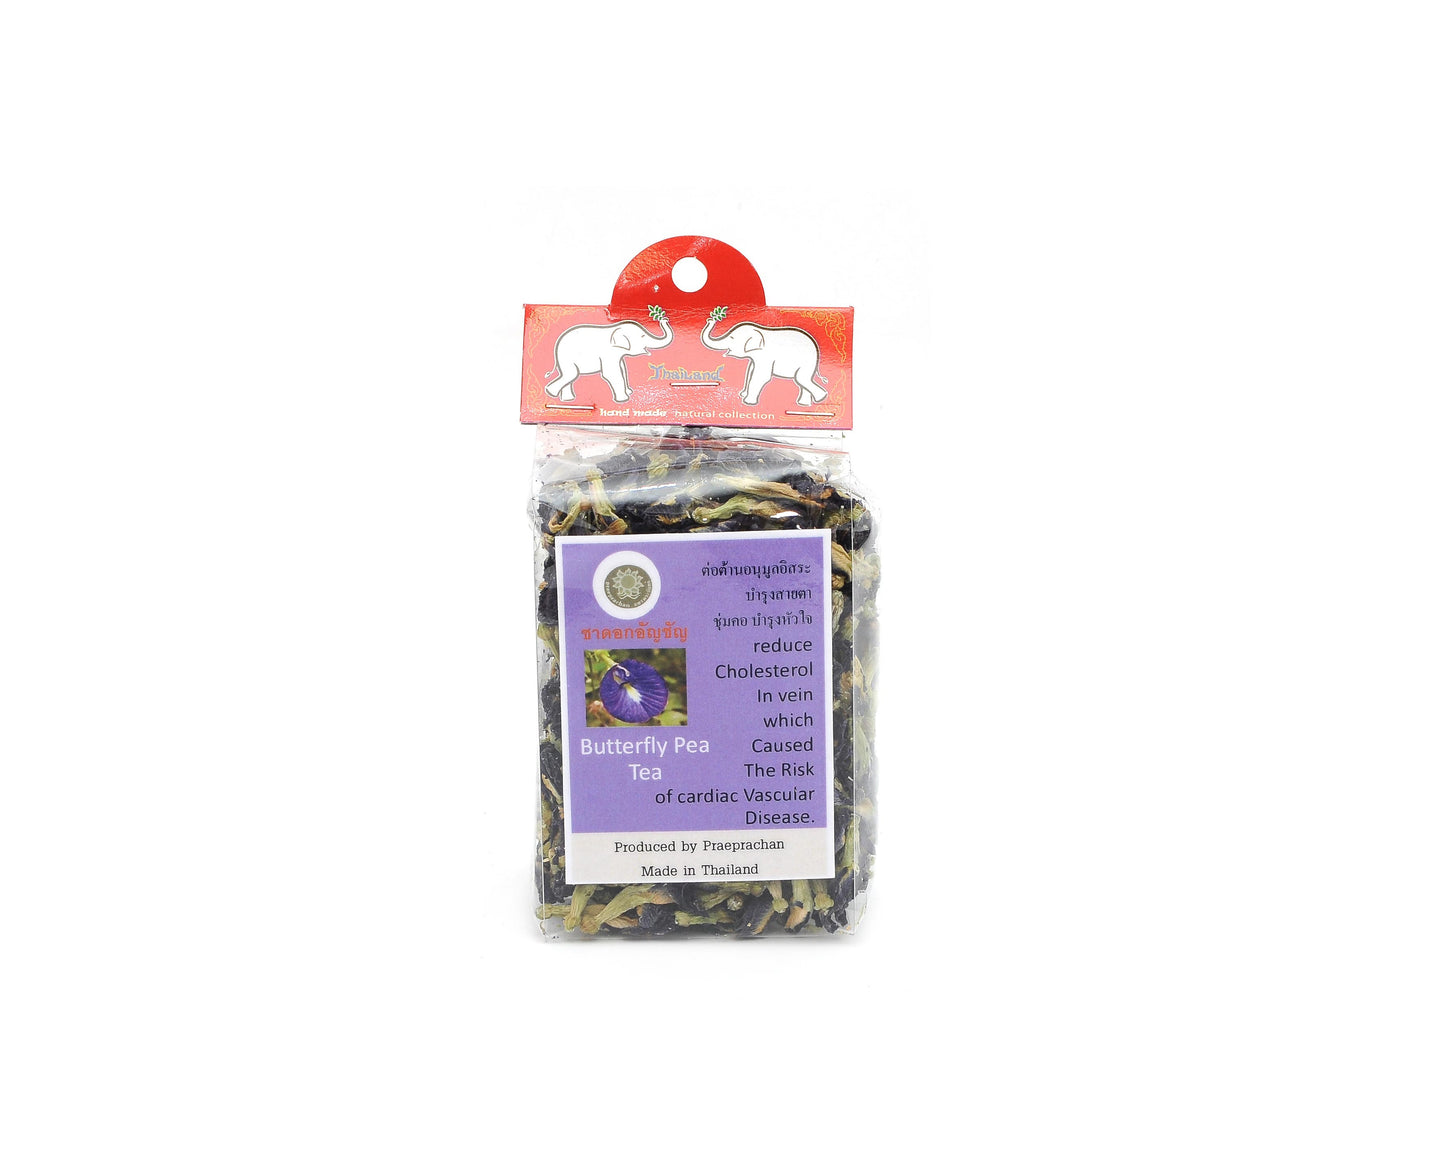 Natural Herbal Tea – 100% Hand-blended With Four Flavors